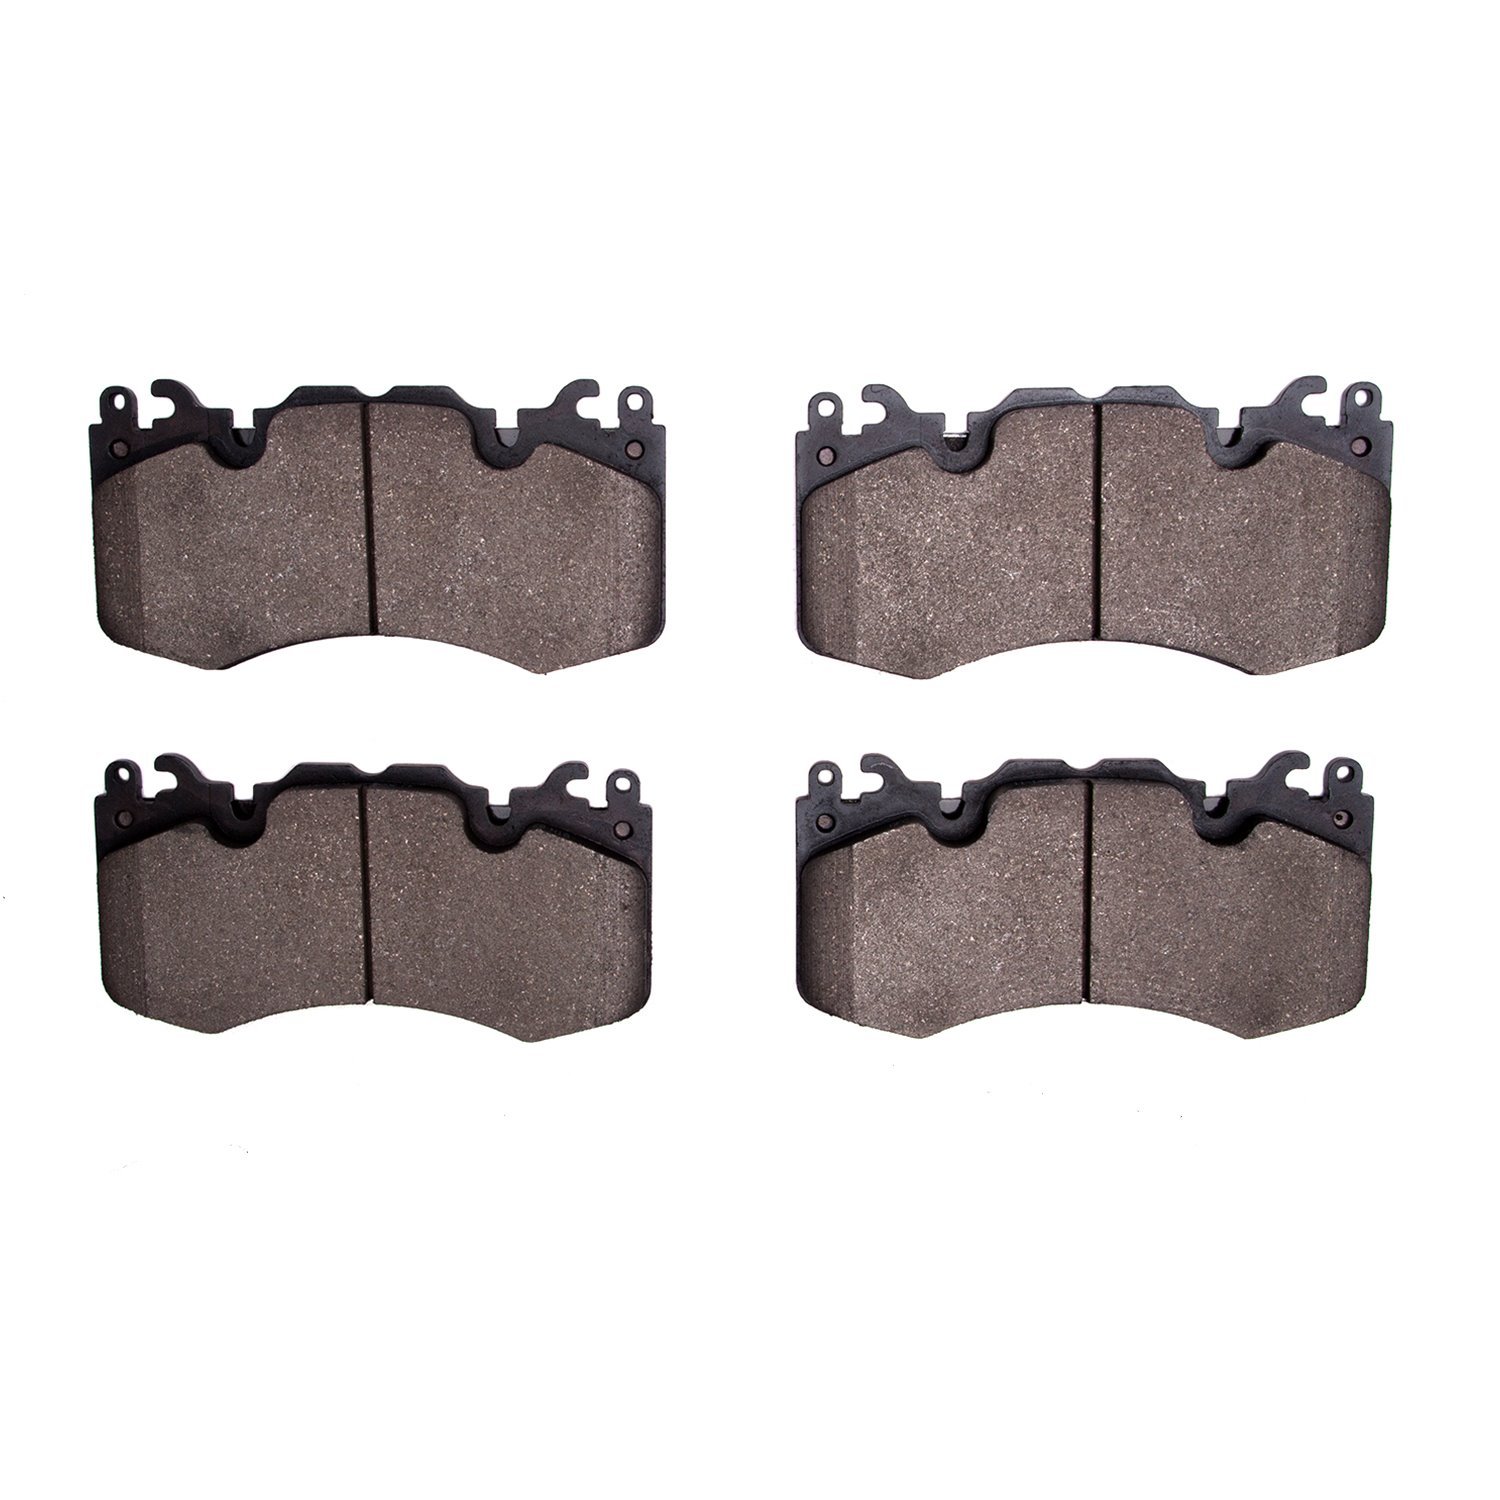 Euro Ceramic Brake Pads, Fits Select Land Rover, Position: Front